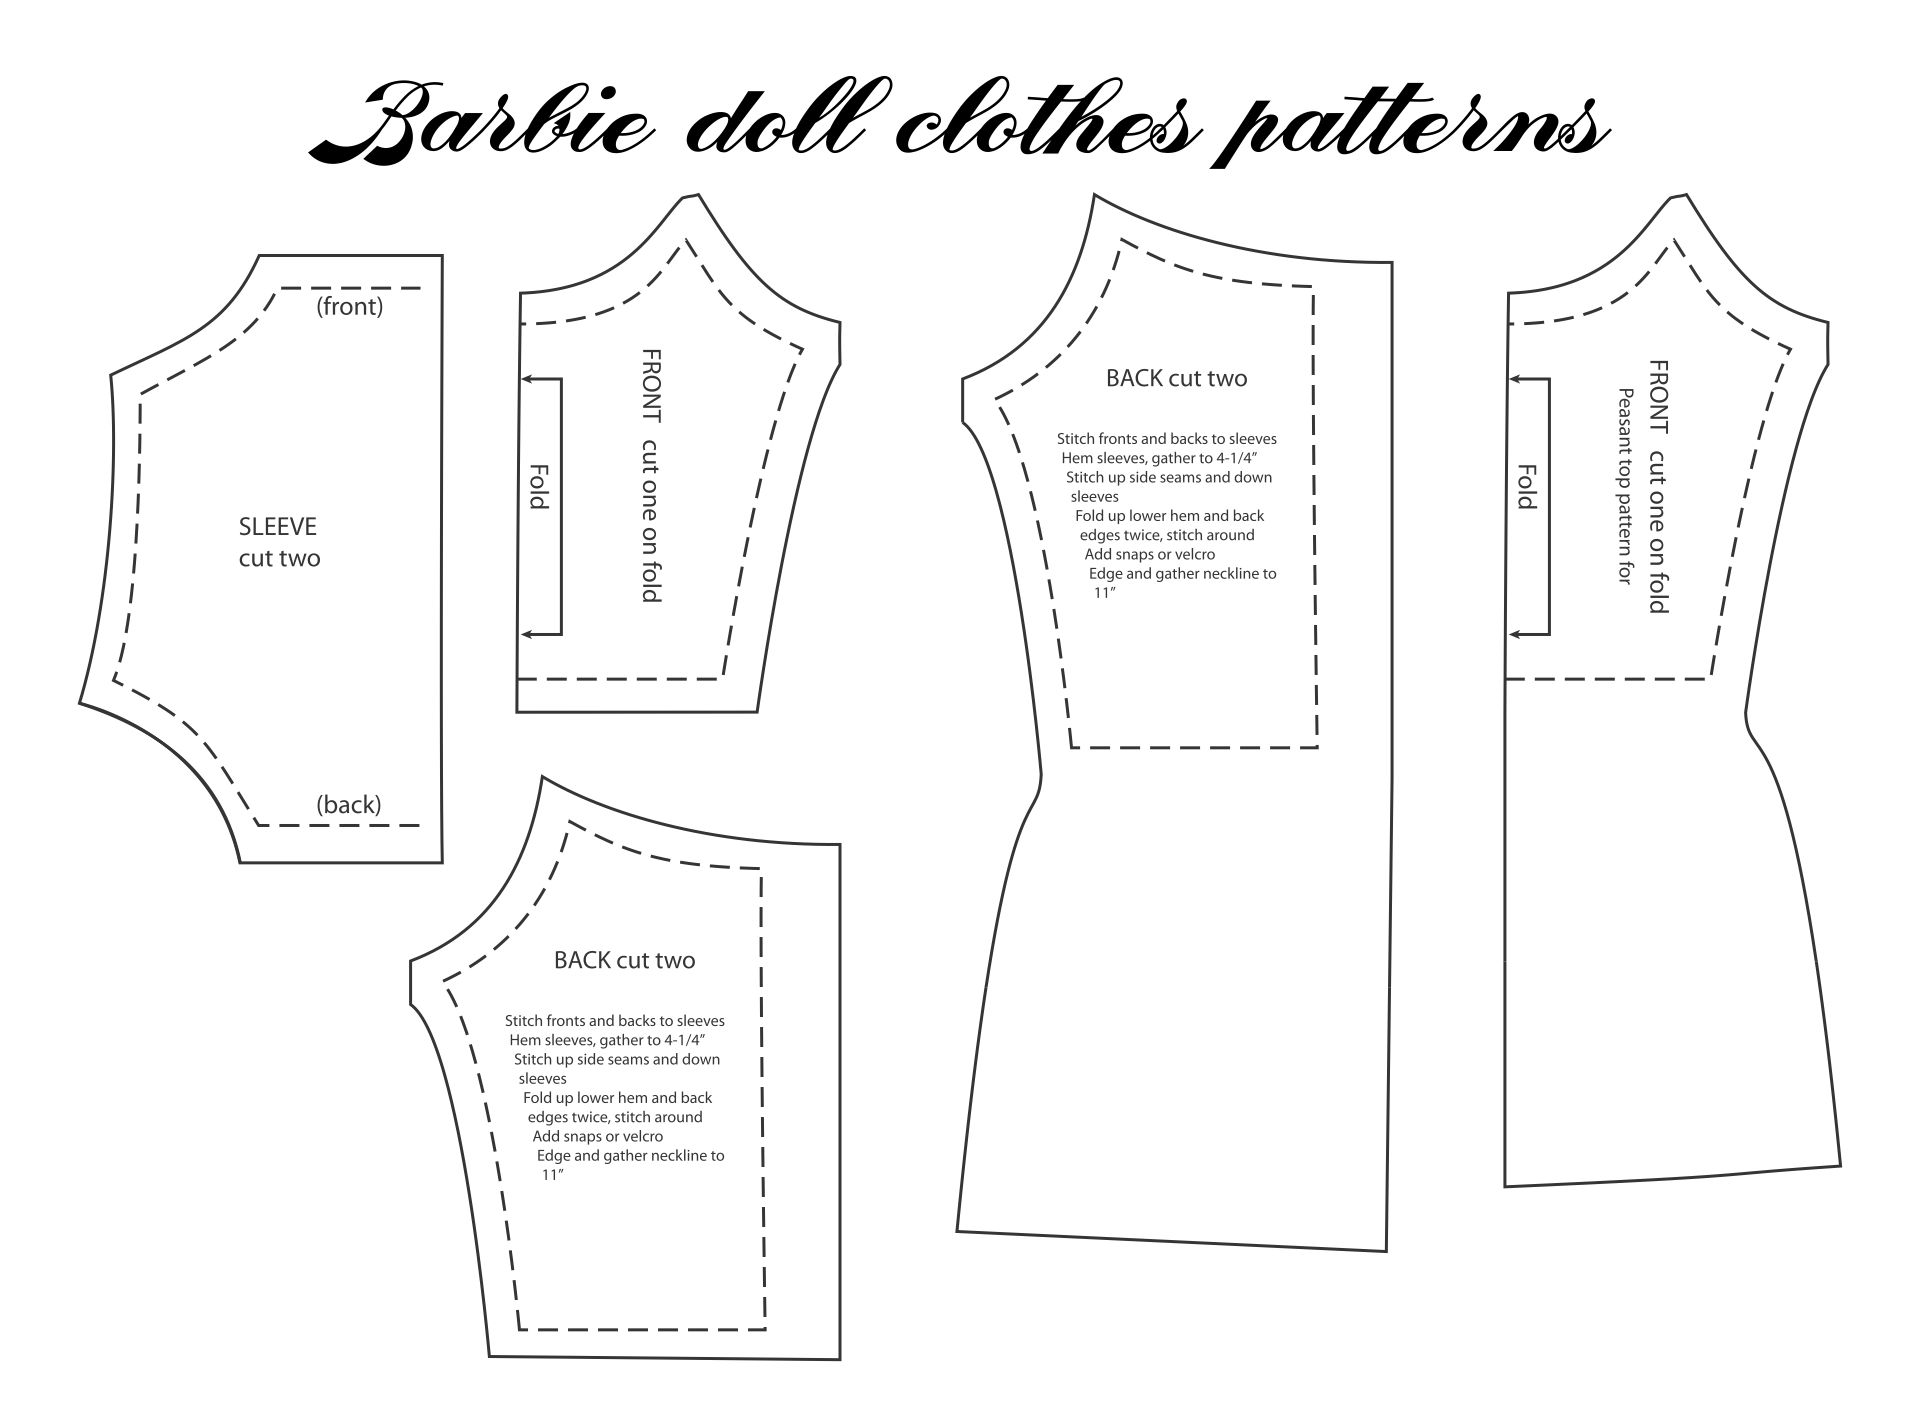 barbie doll clothes patterns        <h3 class=